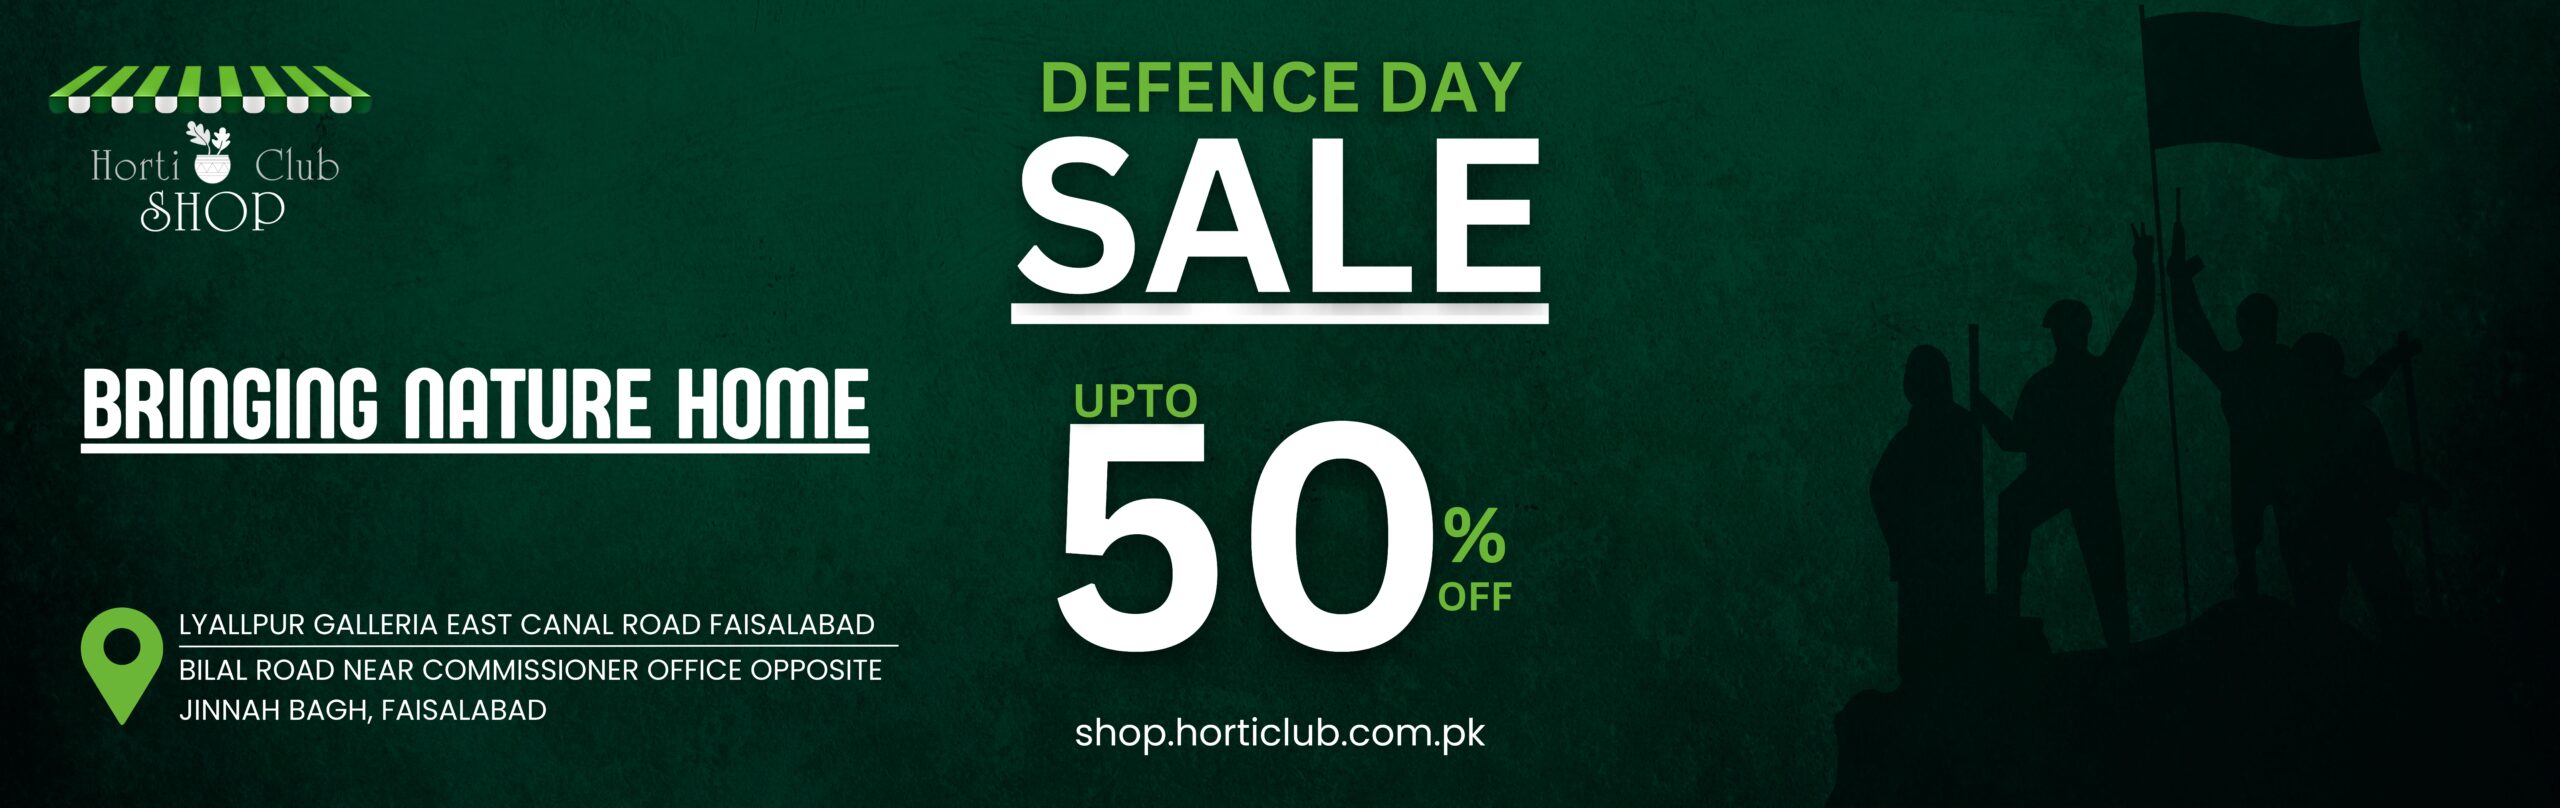 DEFENCE DAY SALE (5938 × 1875 px)(1)